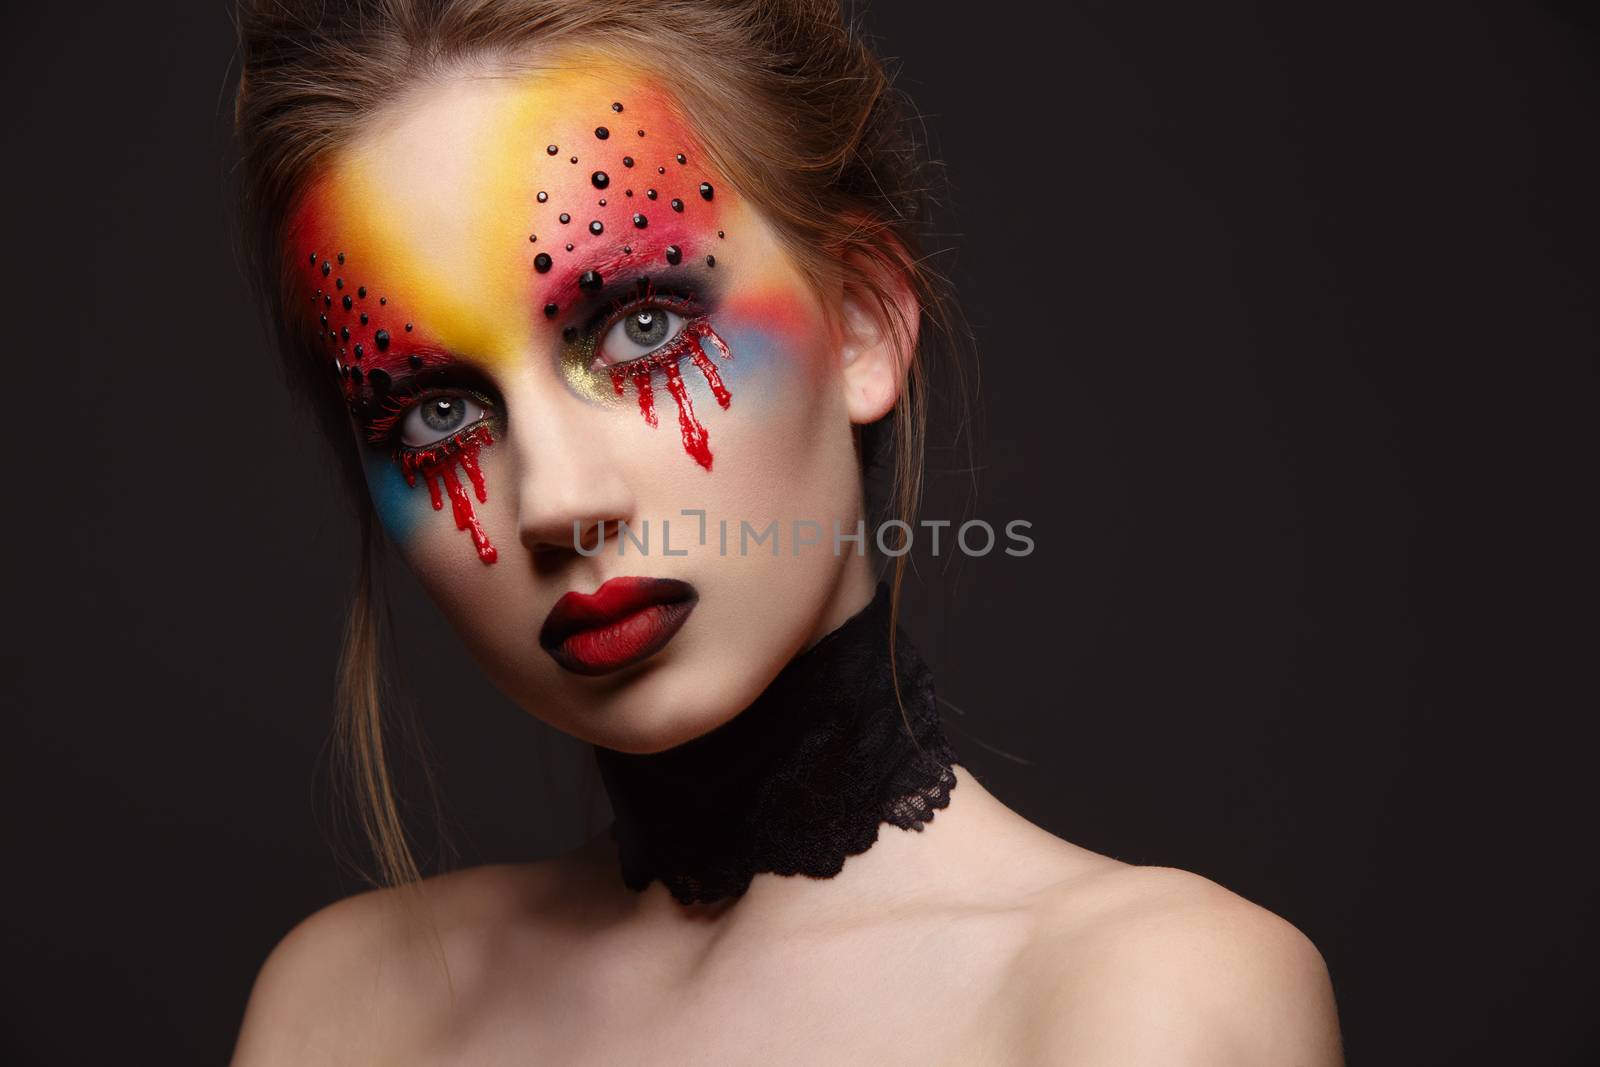 Portrait of young and beauty female model with creative makeup, bloody eyes and black rhinestones